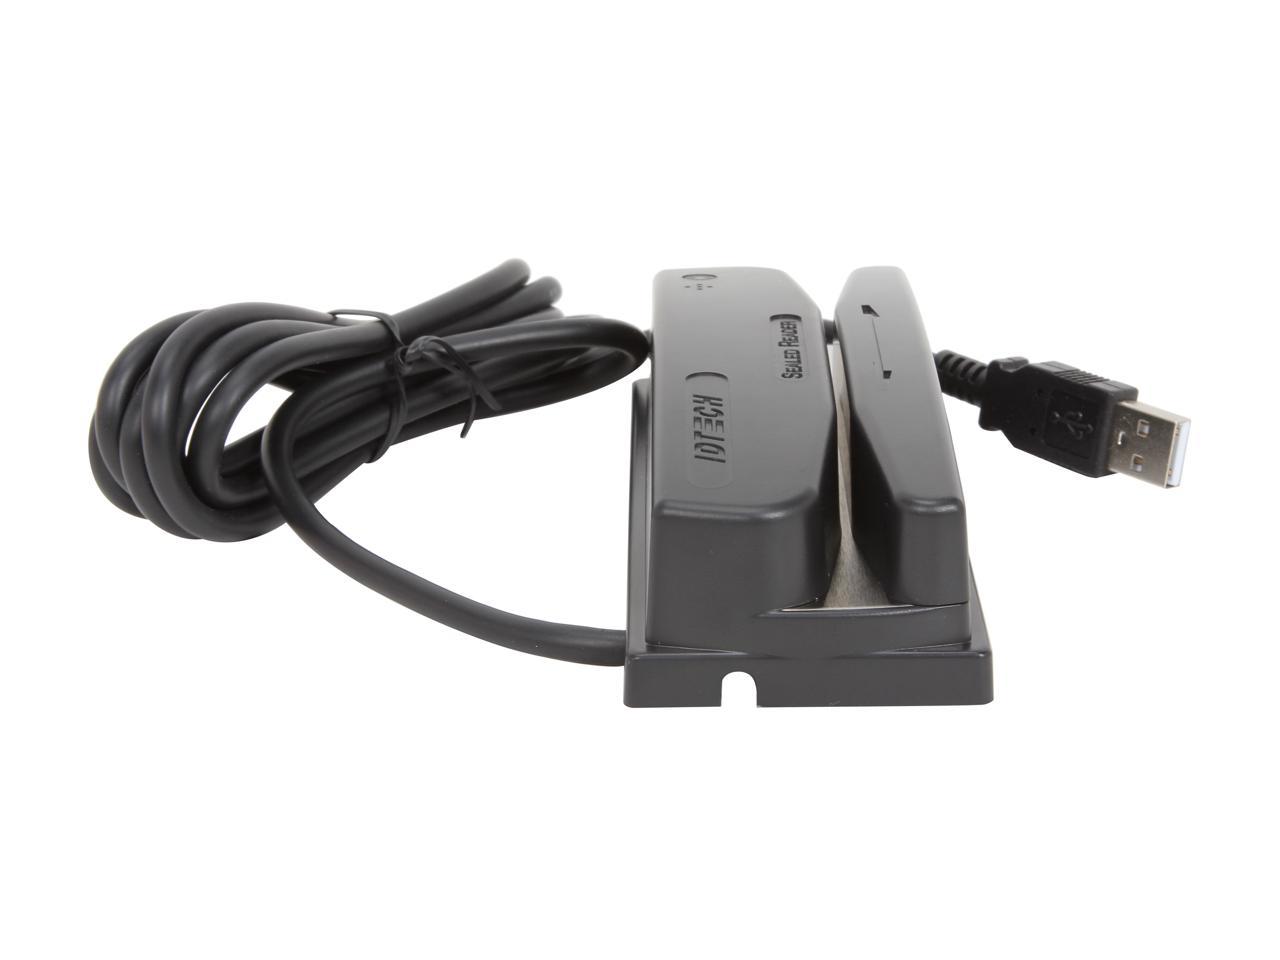 NEW ID TECH WCR3237-600US Omni 3237 Barcode Reader USB Interface Cable Included  735548668459 